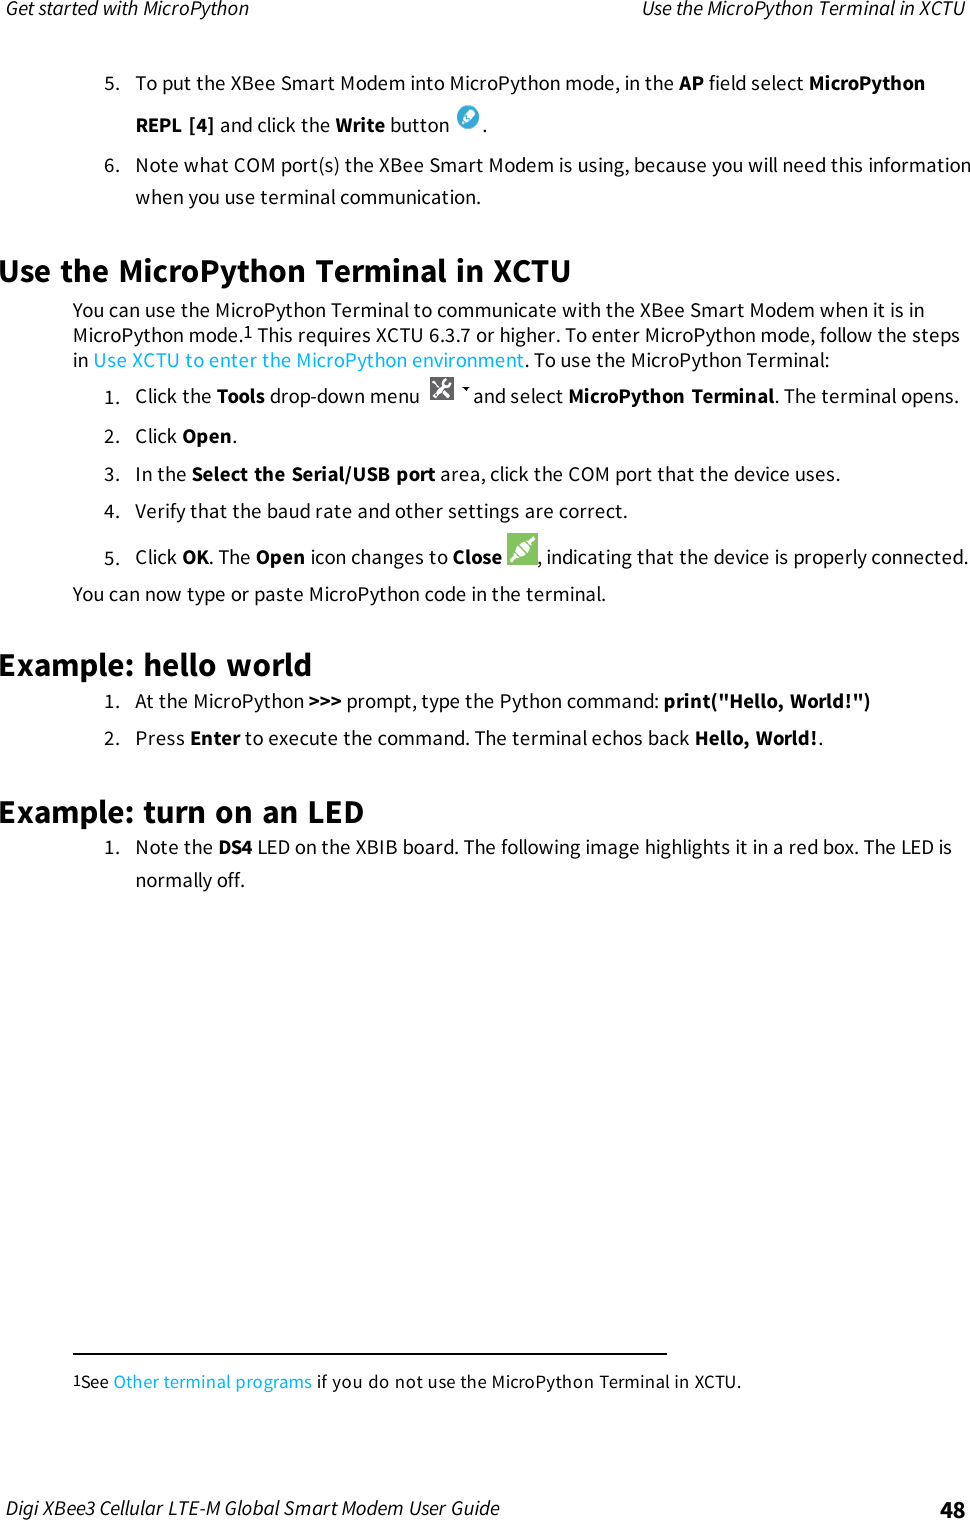 Page 48 of Digi XB3M1 XBee3 Cellular LTE-M User Manual 